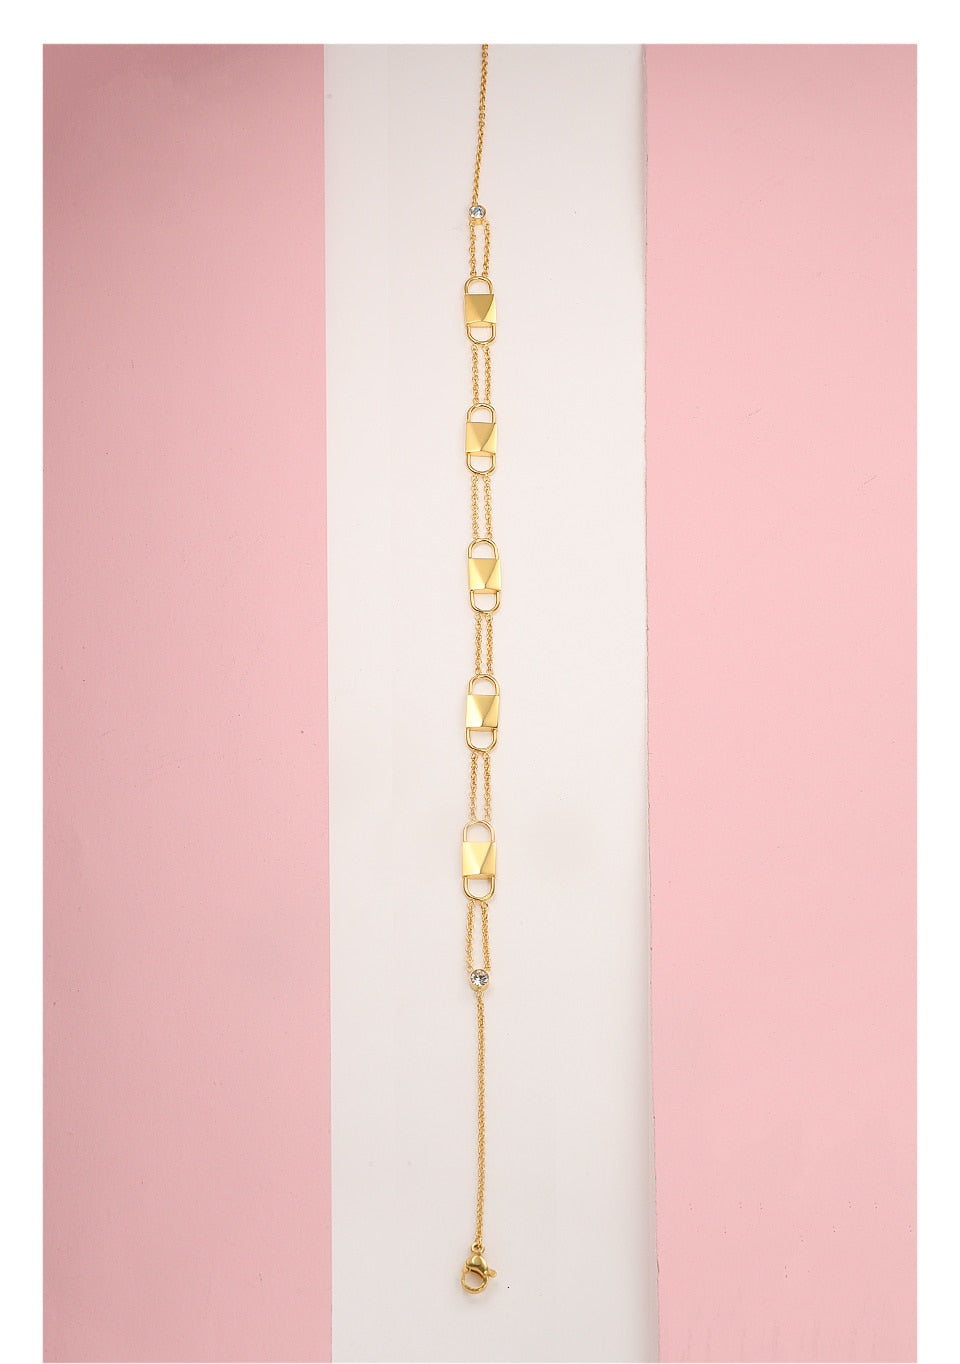 Crystal Choker Necklace Gold